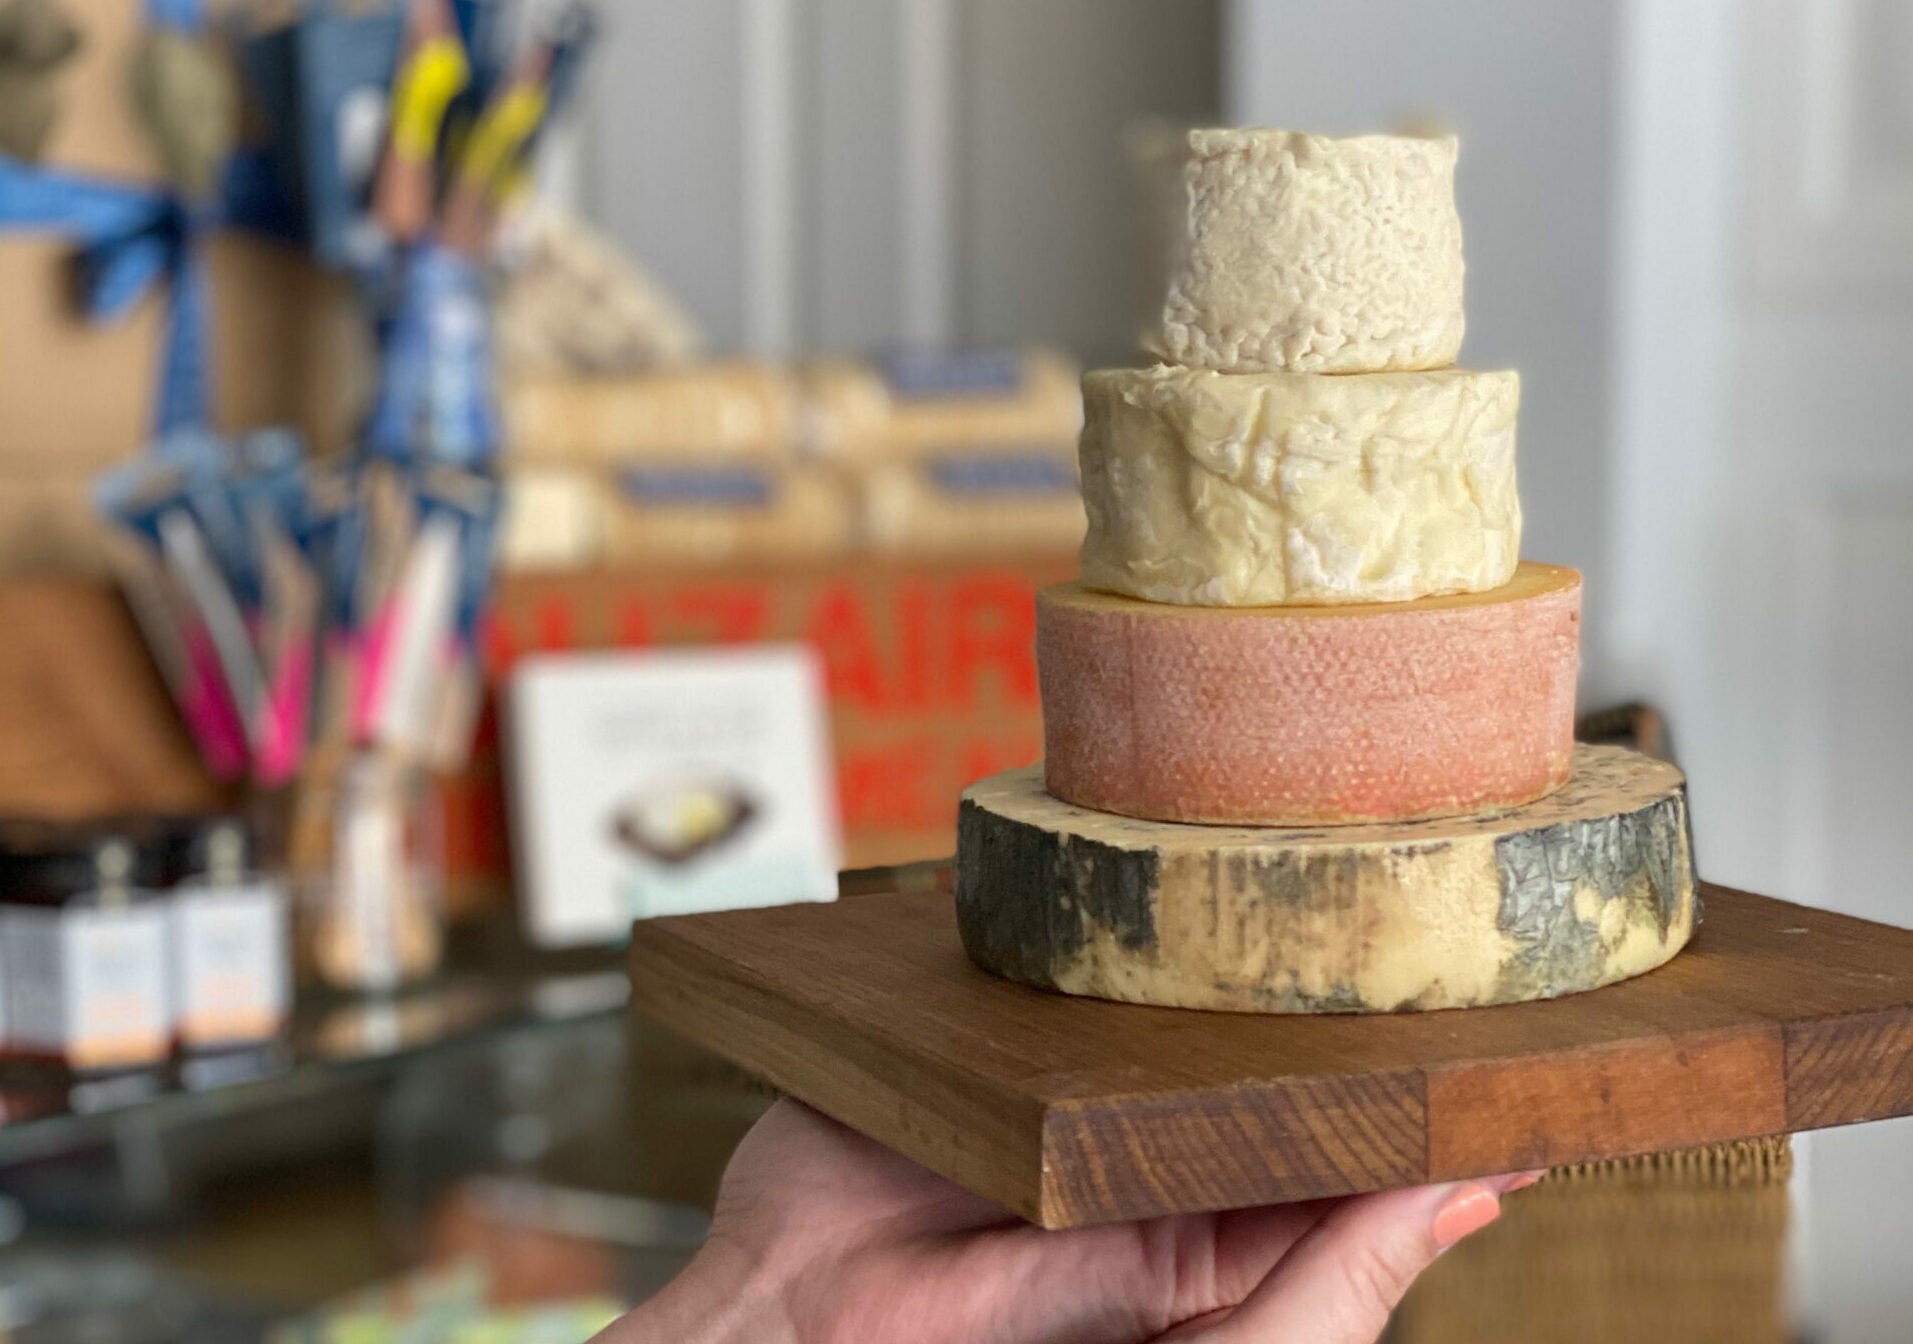 Gift idea 4:  The Christmas Cheese Tower